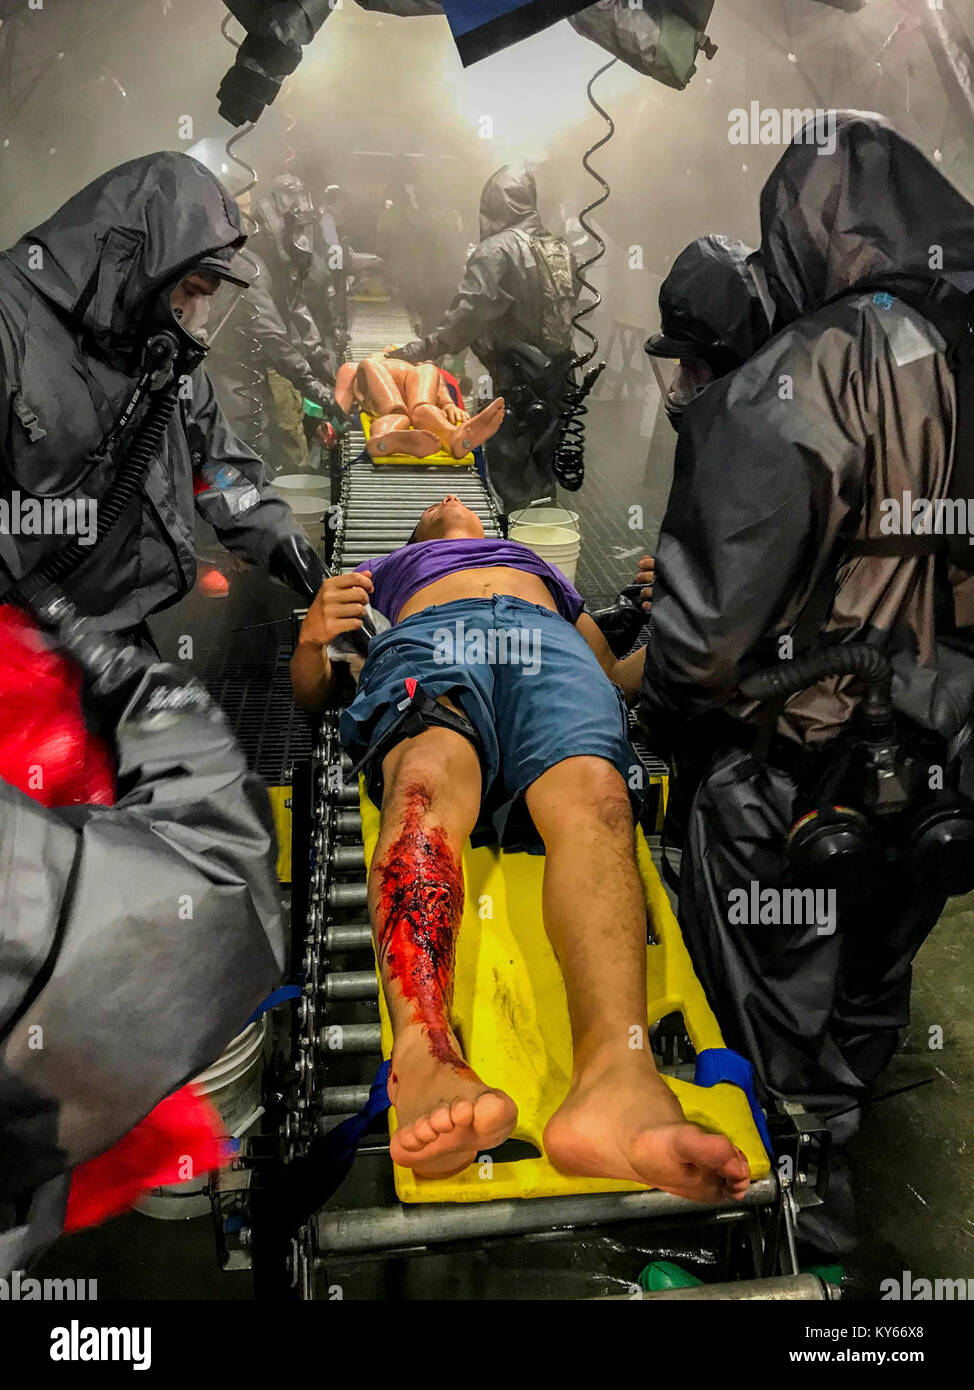 U.S. Army Active Duty, National Guard, and Reserve Soldiers along with local first responders participate in a Mass Casualty Decontamination exercise at the Homestead-Miami Speedway, in Miami-Dade, Florida, Jan. 9, 2018.  This is the 3rd in a series of joint training exercises between Active Duty, Guard, and Reserve Army units and local municipalities across the United States. This JTE focused on the decontamination and transportation of casualties in a simulated mass chemical attack. (DoD Stock Photo